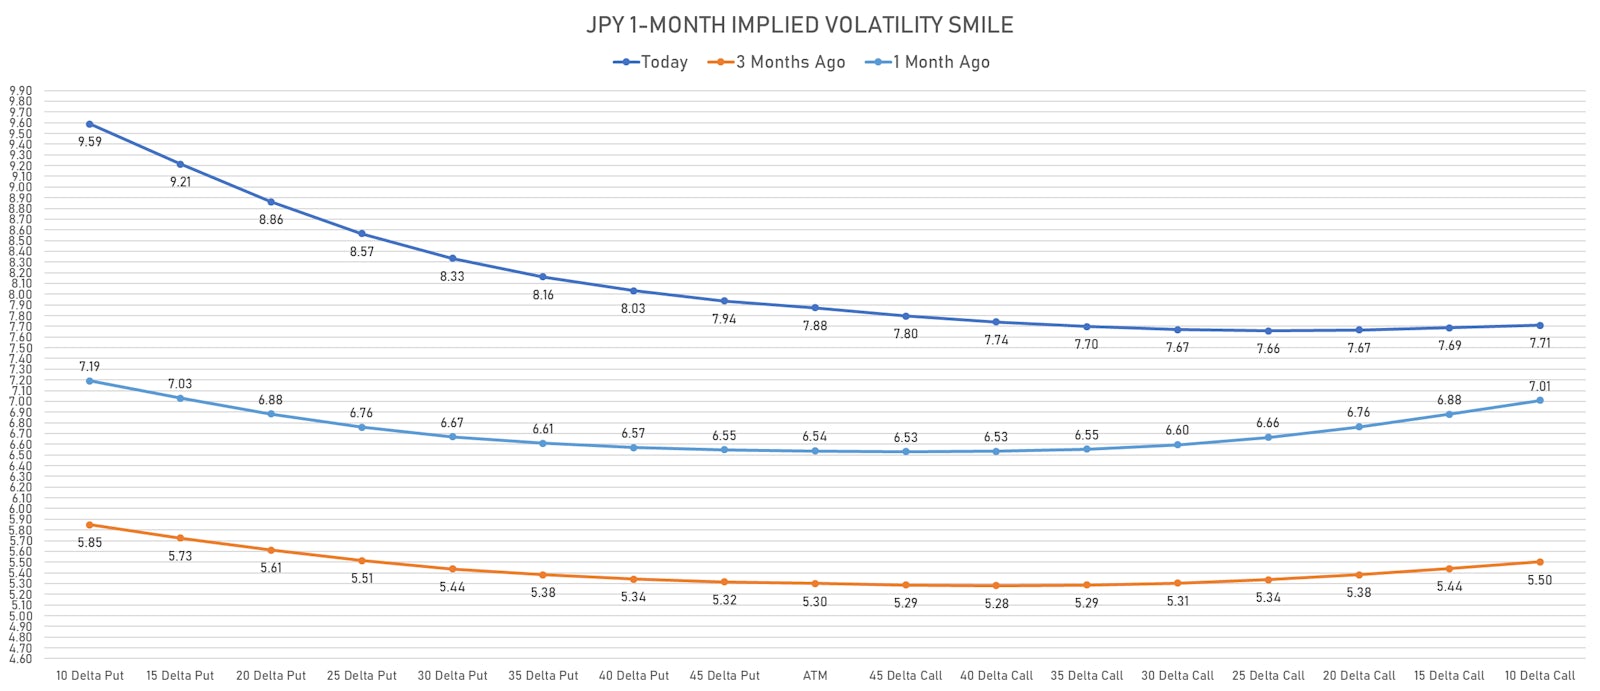 Changes In The JPY 1-Month Implied Volatility Smile | Sources: ϕpost, Refinitiv data